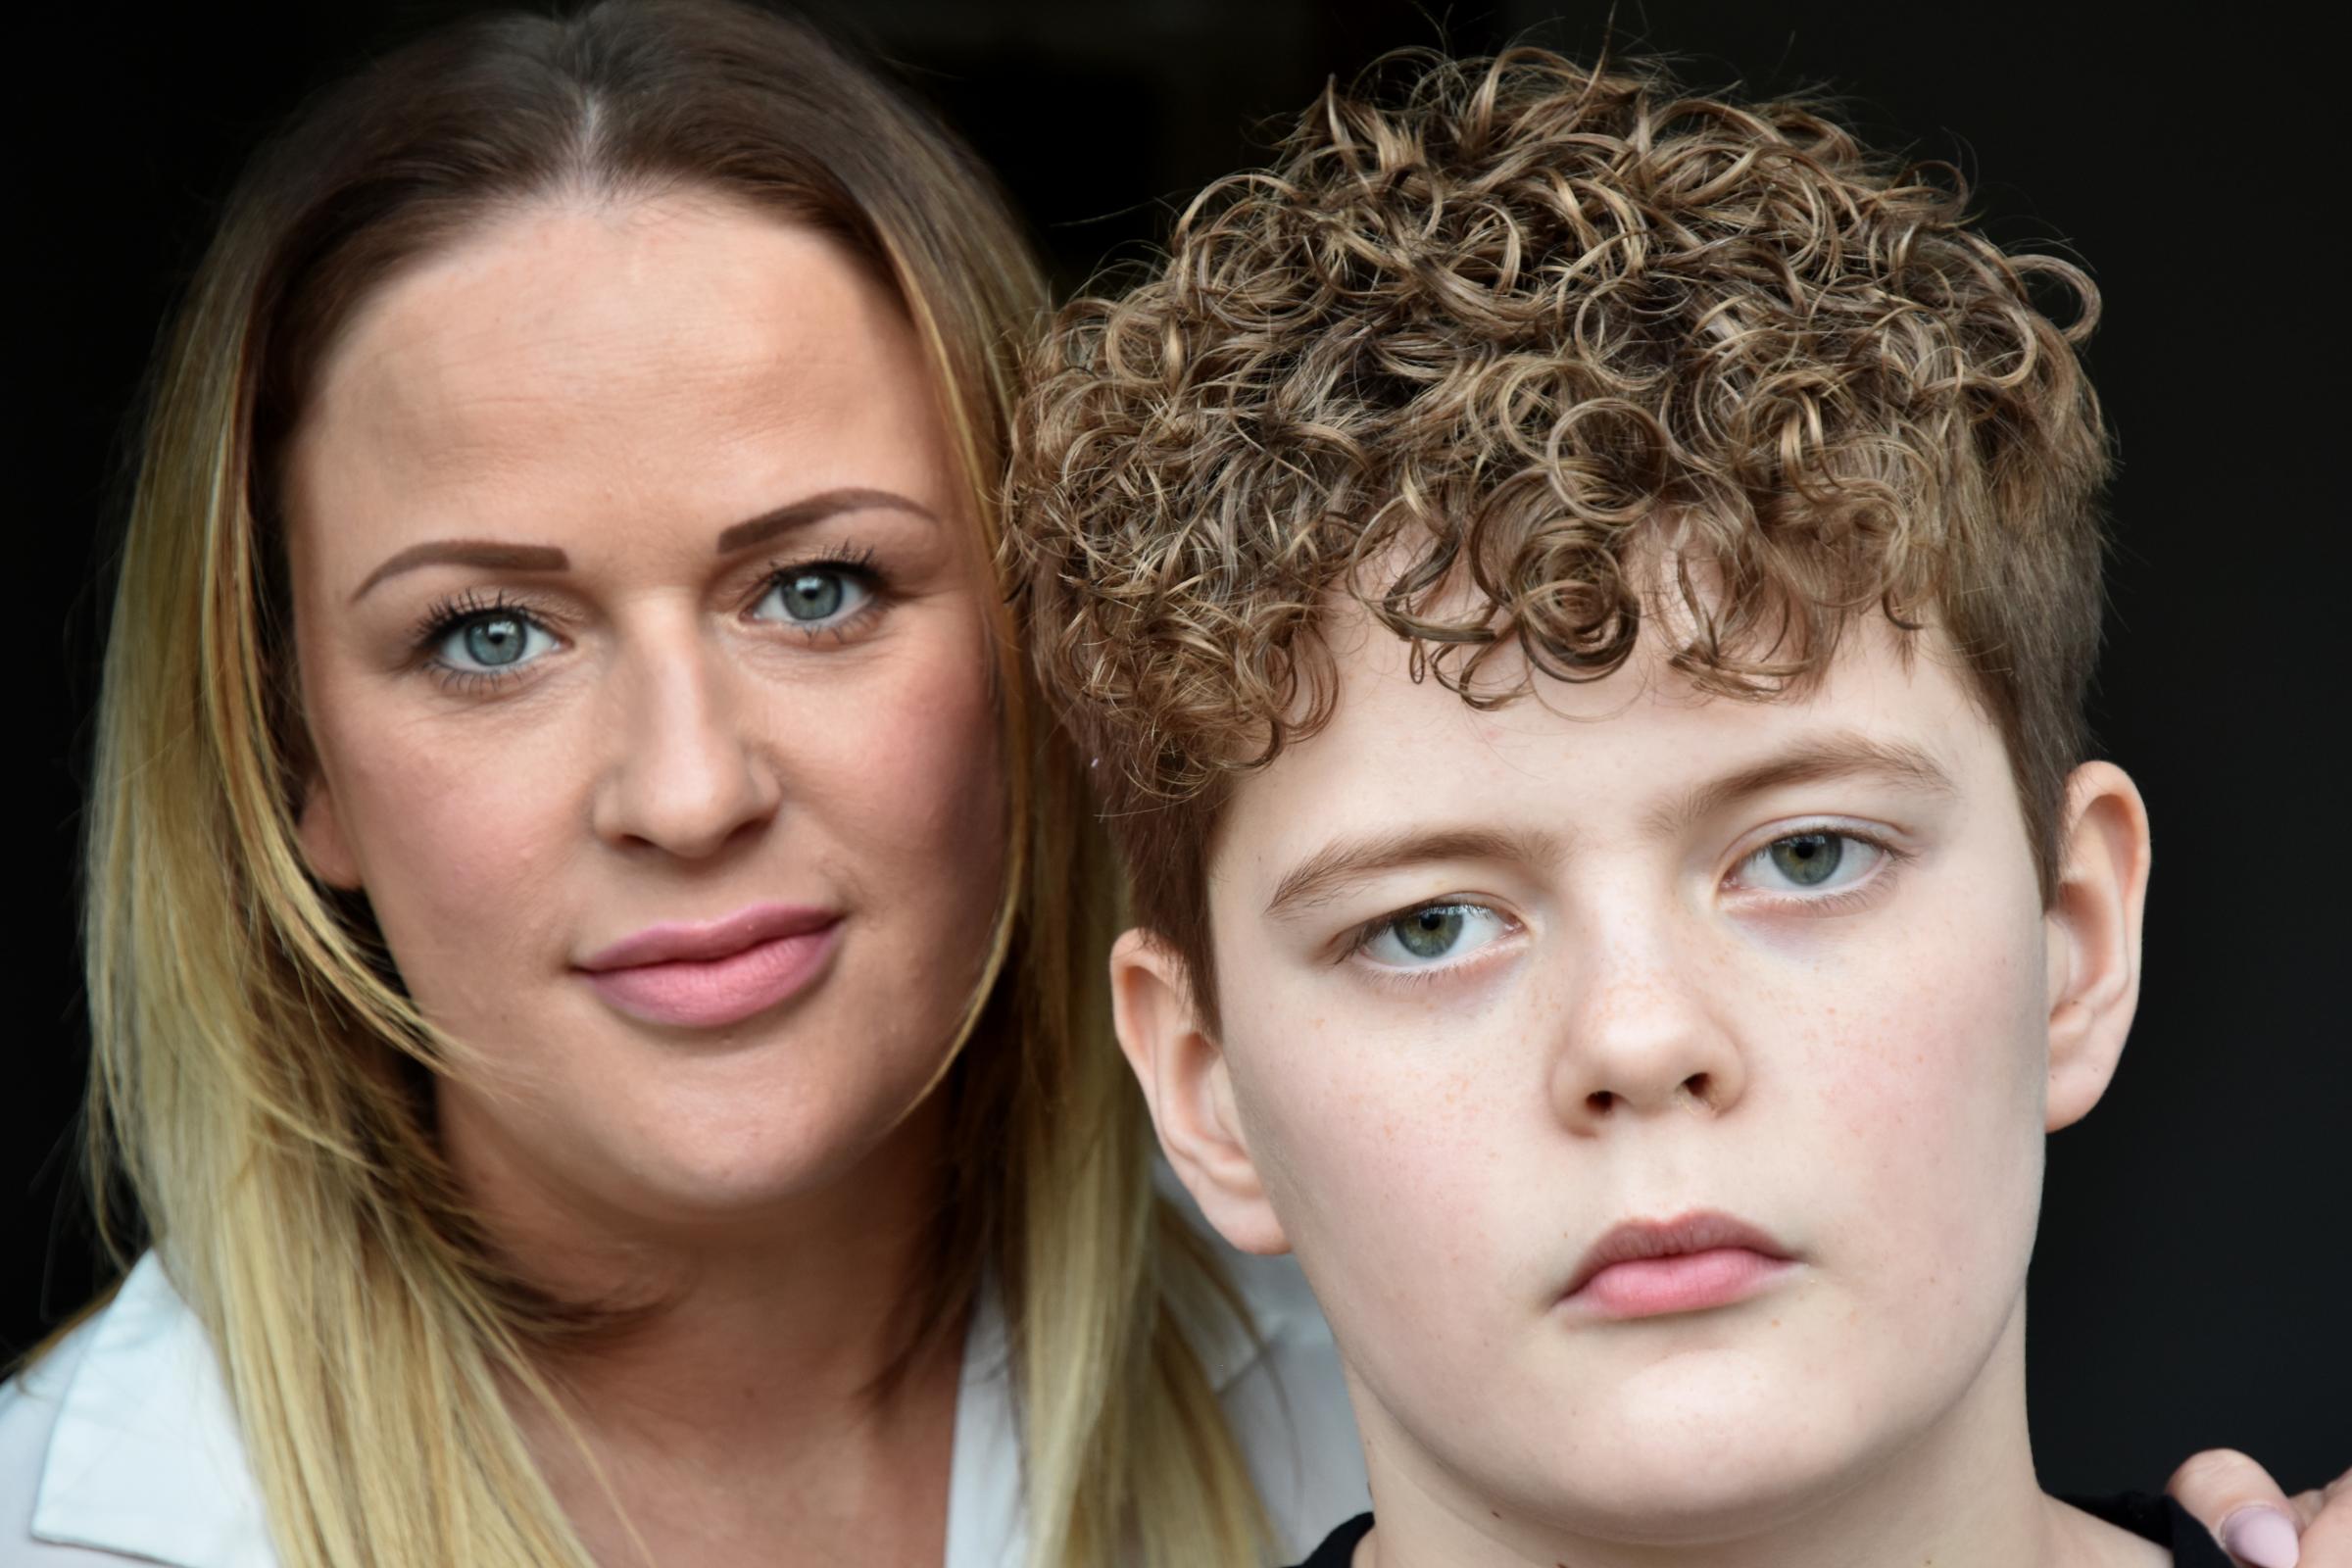 Tourette's sufferer Fletcher, 11, has been threatened and called names